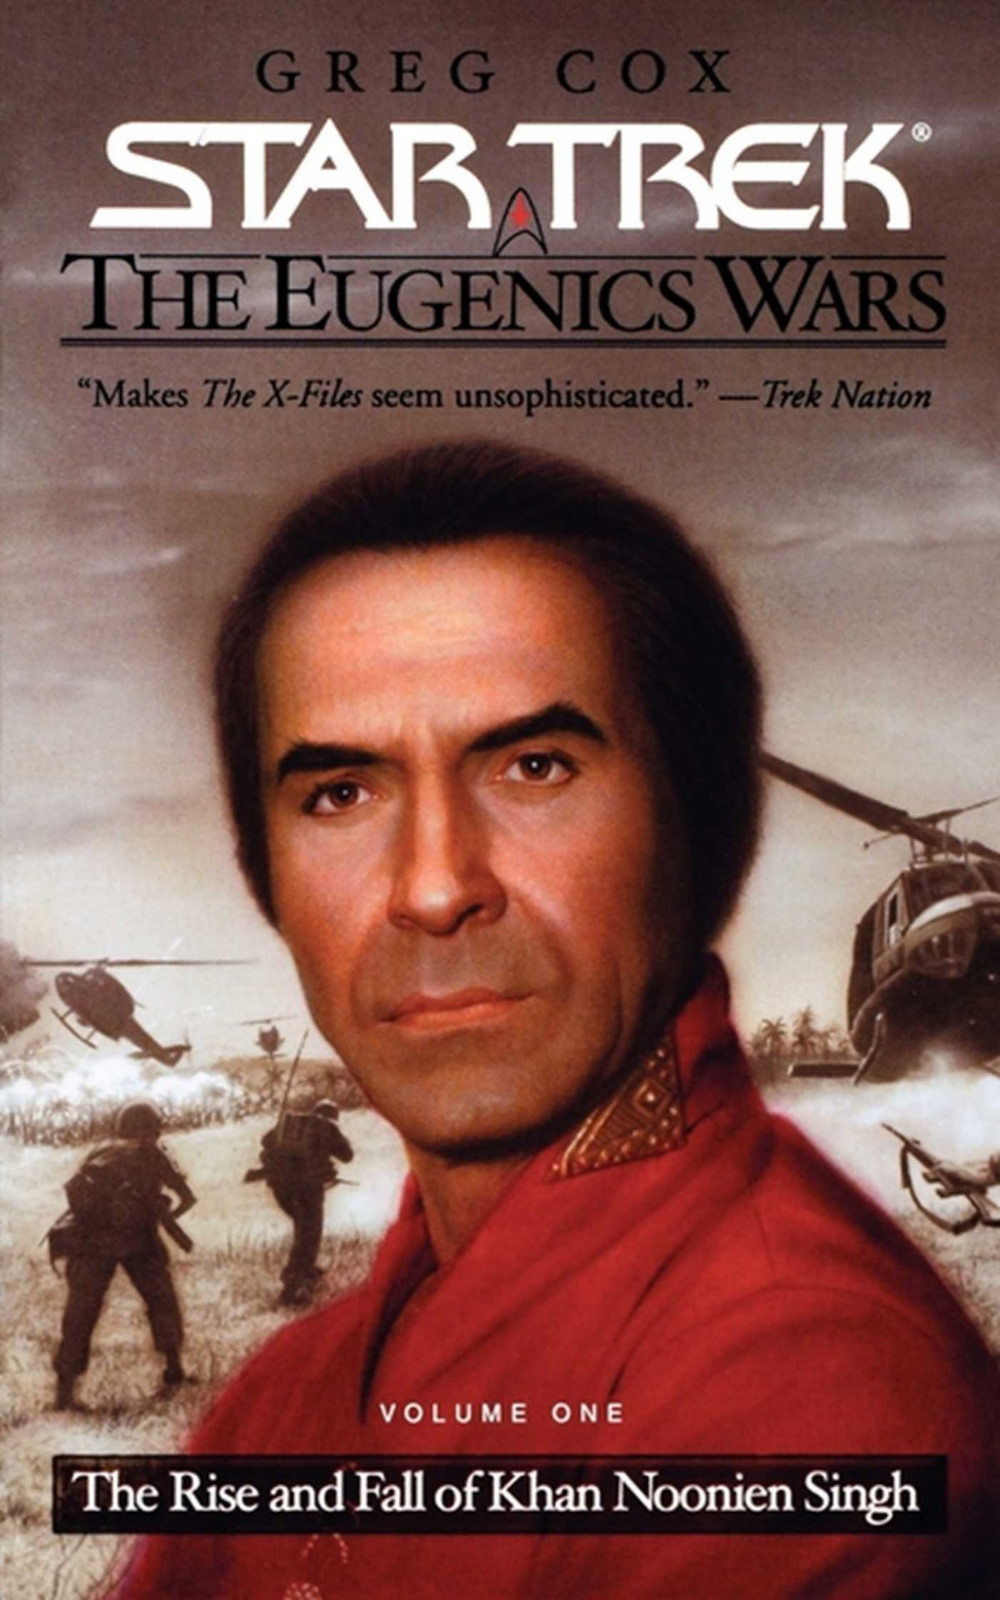 The Eugenics Wars: The Rise and Fall of Khan Noonien Singh, Book One (Jun 2001)